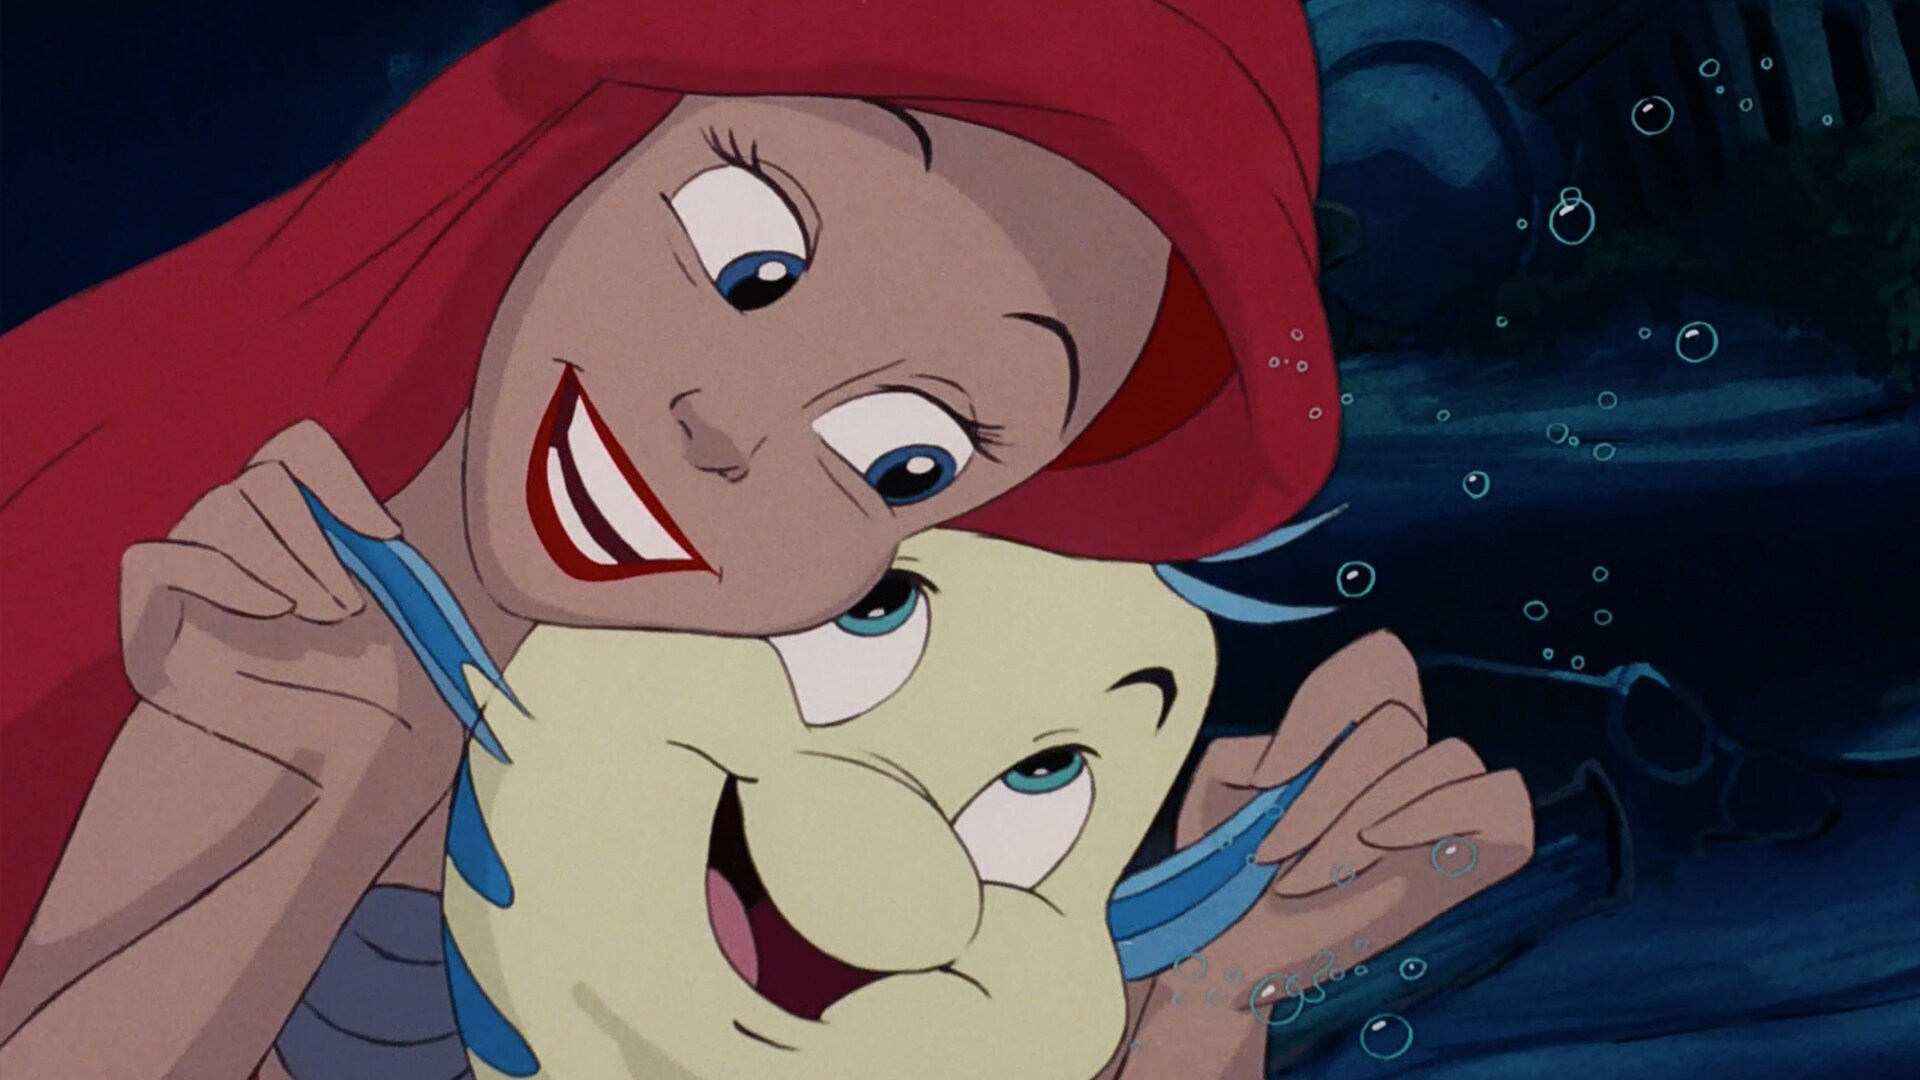 This Day in Disney History: The Little Mermaid